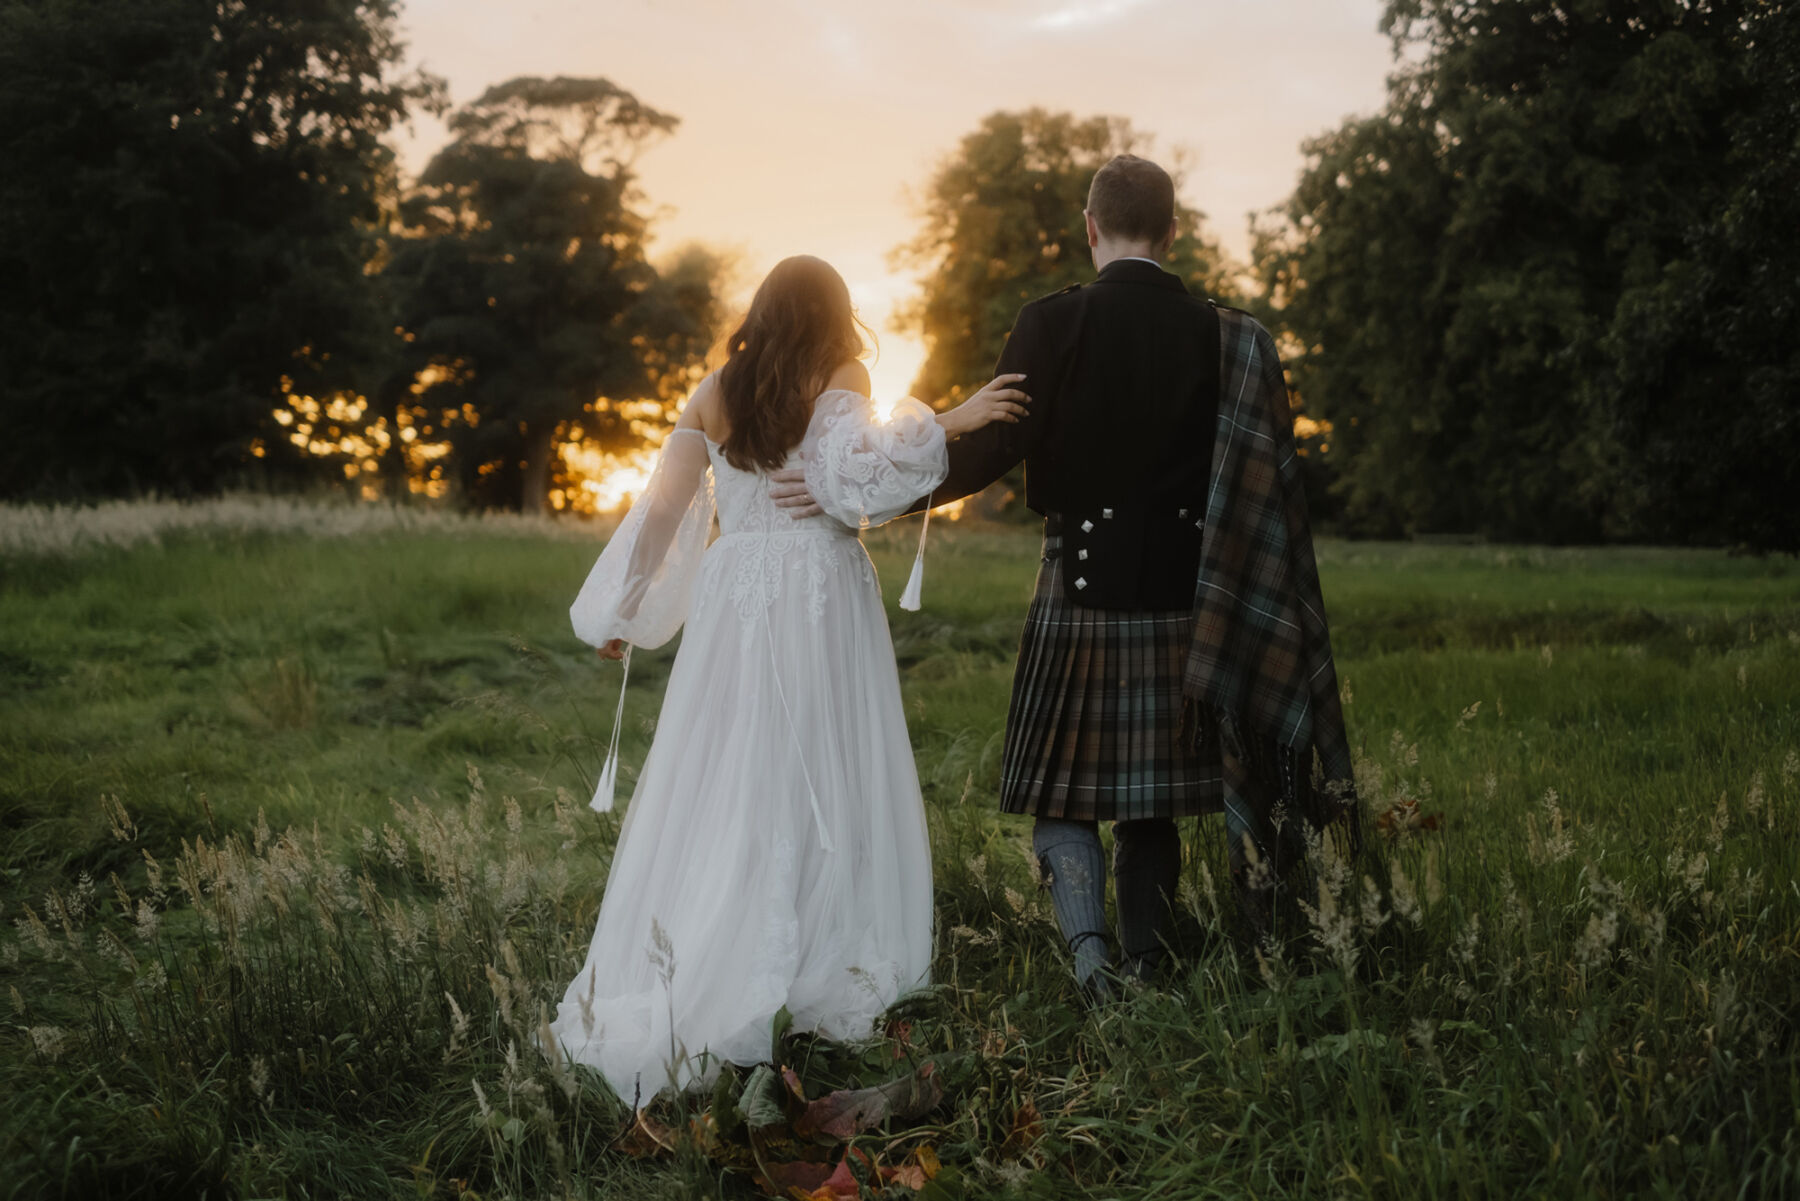 Golden hour shot of bride and groom walking outside. Photograph taken from behind - groom wears a kilt in greens and blues. Bride wears a bohemian inspied wedding dress by Willowby Watters.